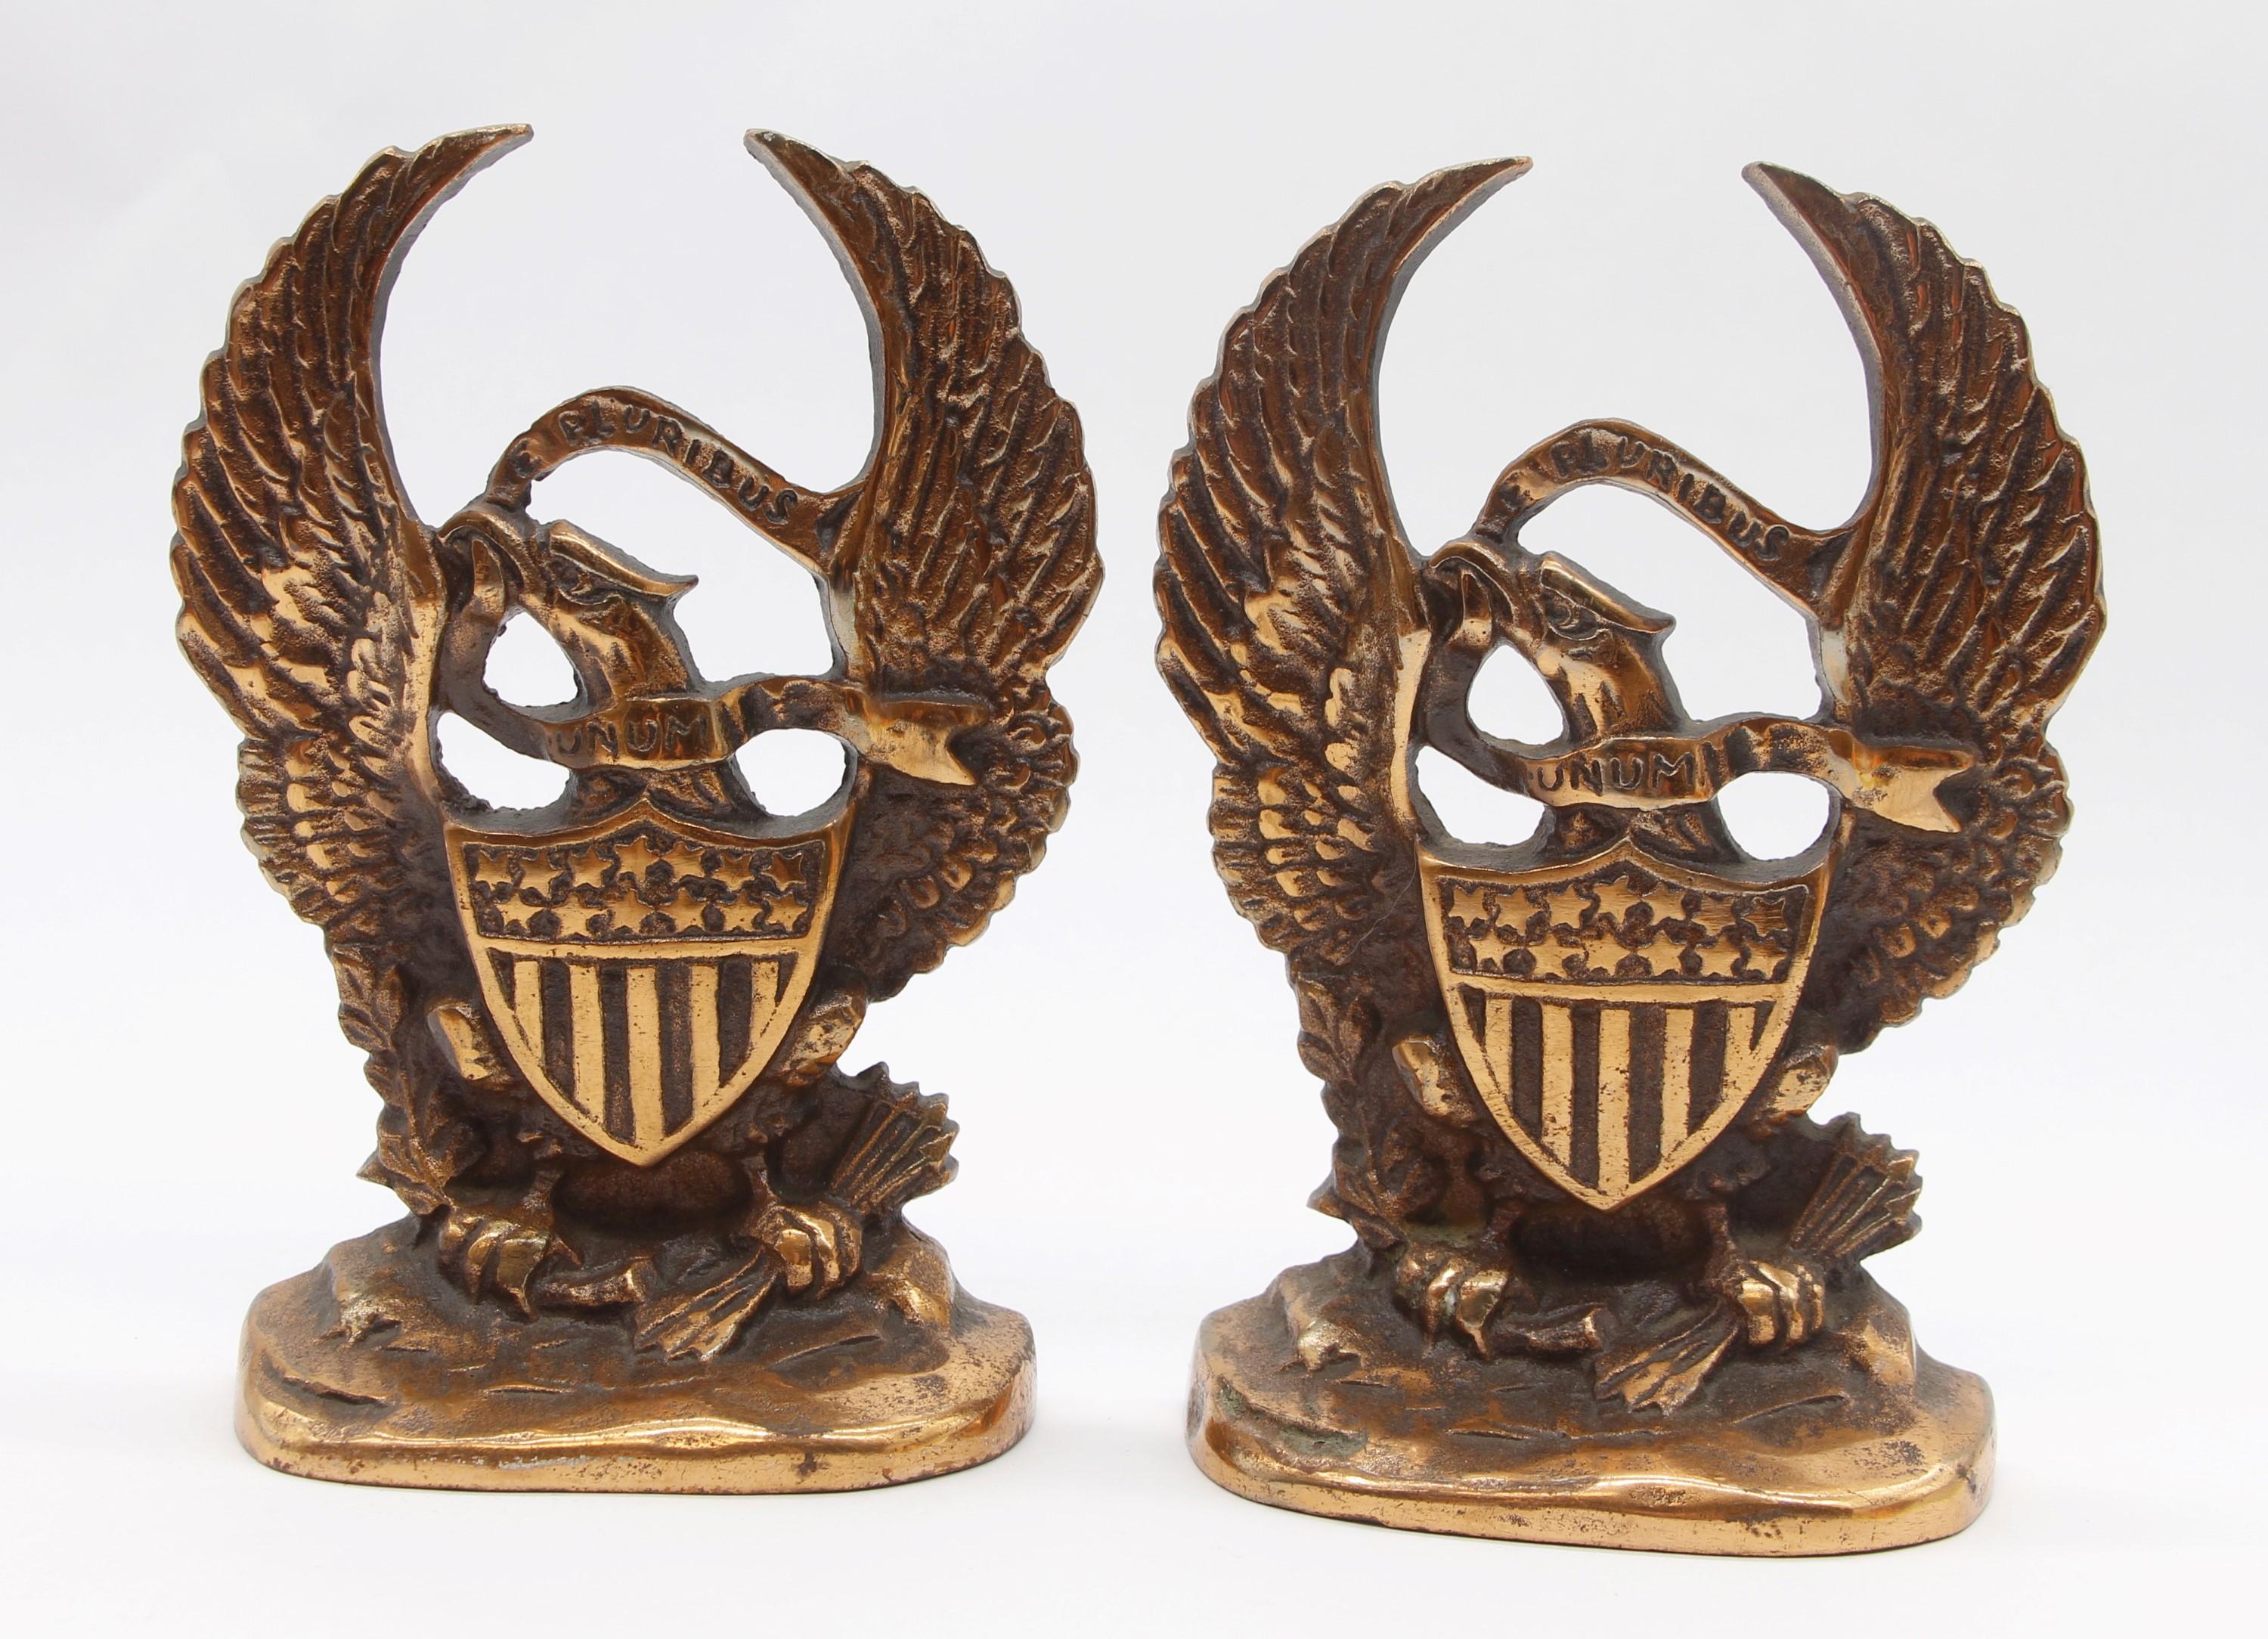 Stately early 20th Century pair of US eagle bookends. Each eagle has outstretched wings and a shield in front embossed with E Pluribus Unum, meaning 